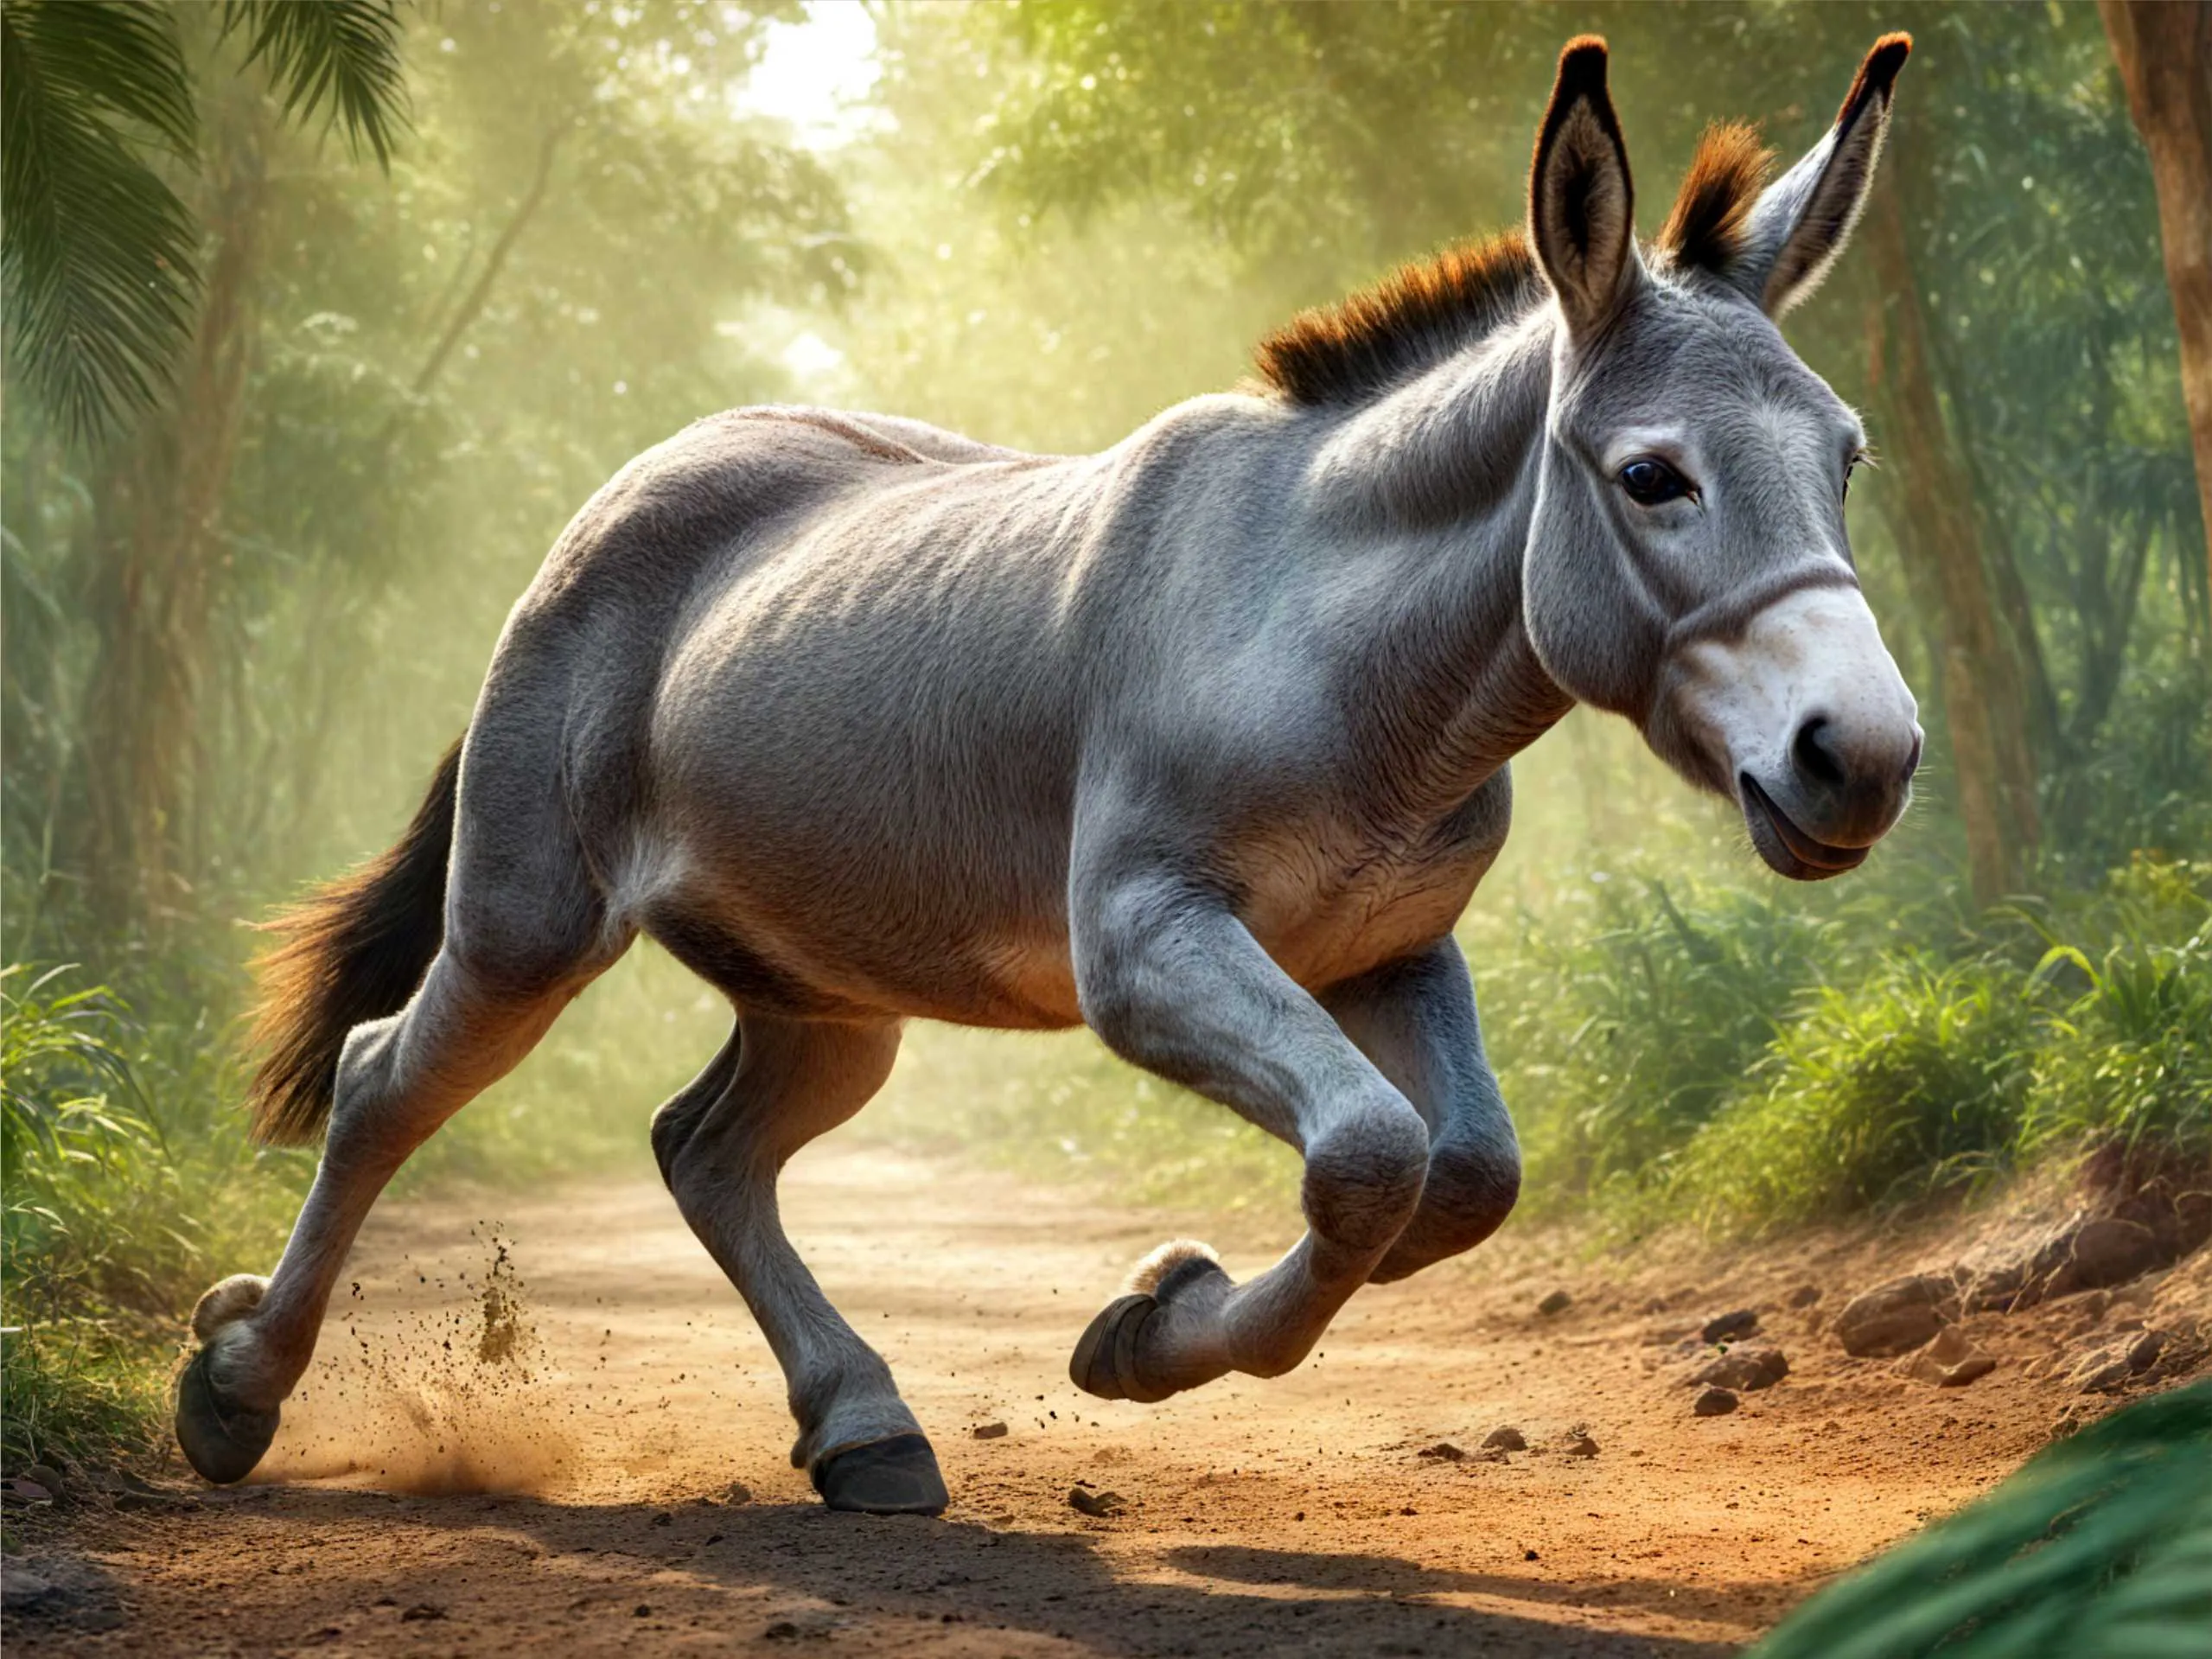 Cartoon image of a donkey in jungle